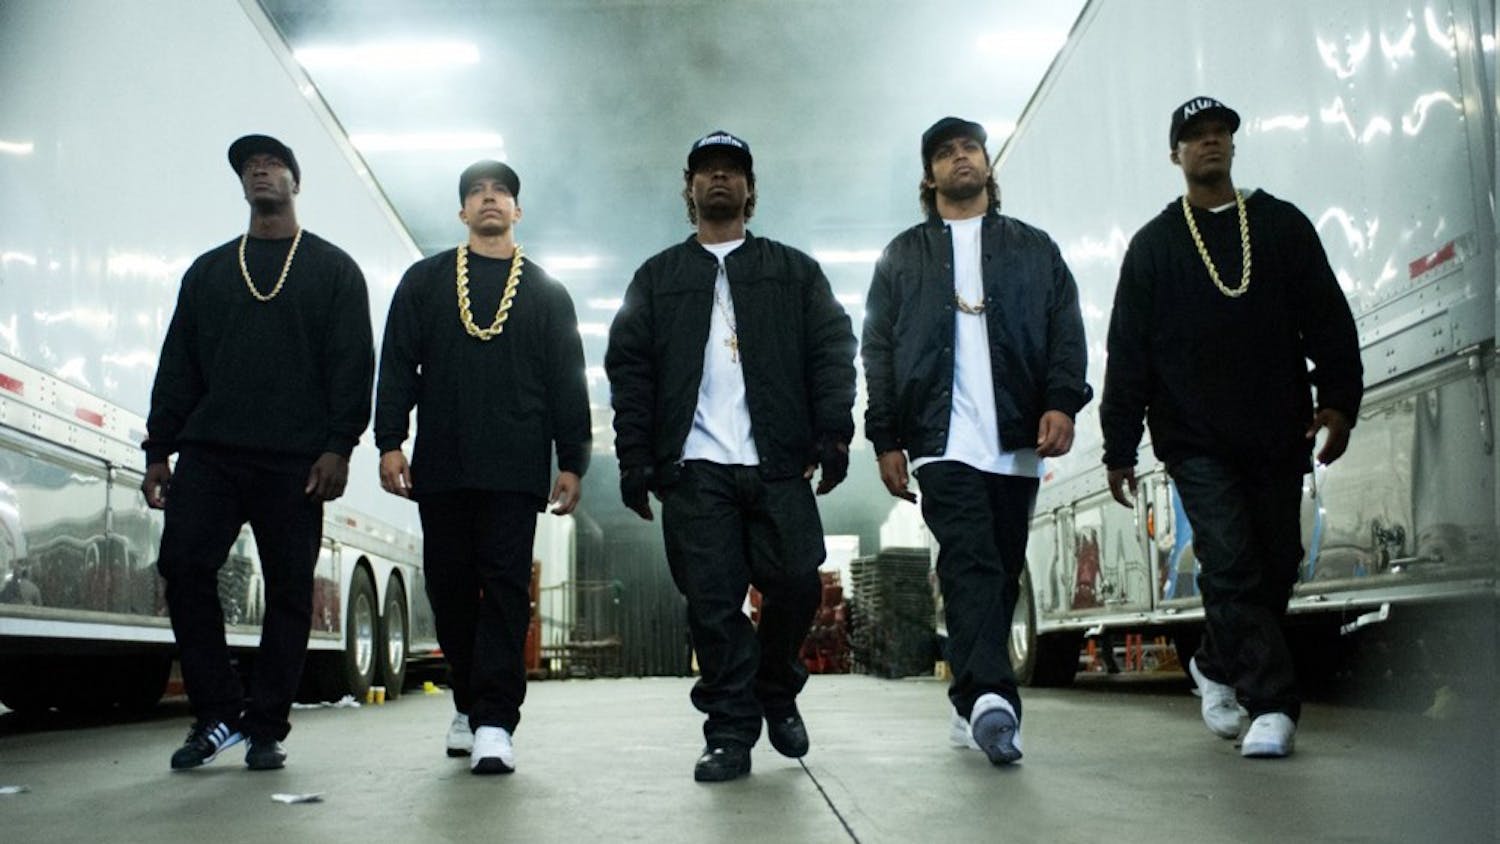 KIDS-TEENS-MOVIE-REVIEW-OUTTA-COMPTON-FL